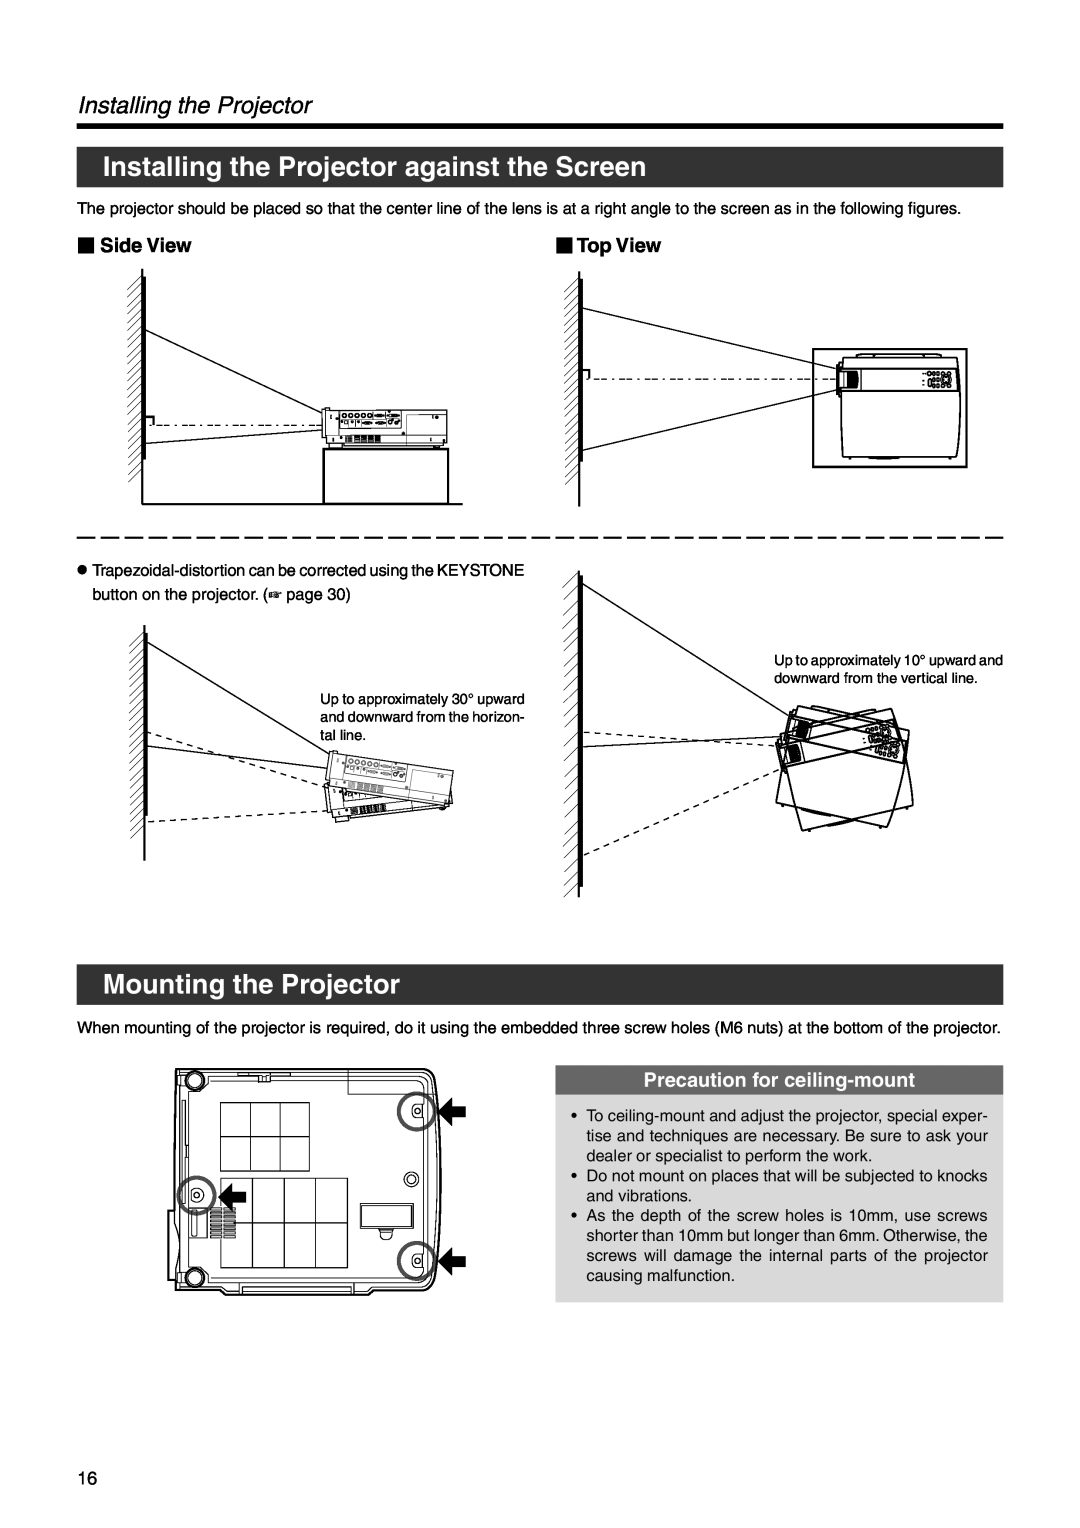 Dukane 28A9017 user manual Installing the Projector against the Screen, Mounting the Projector,  Side View,  Top View 